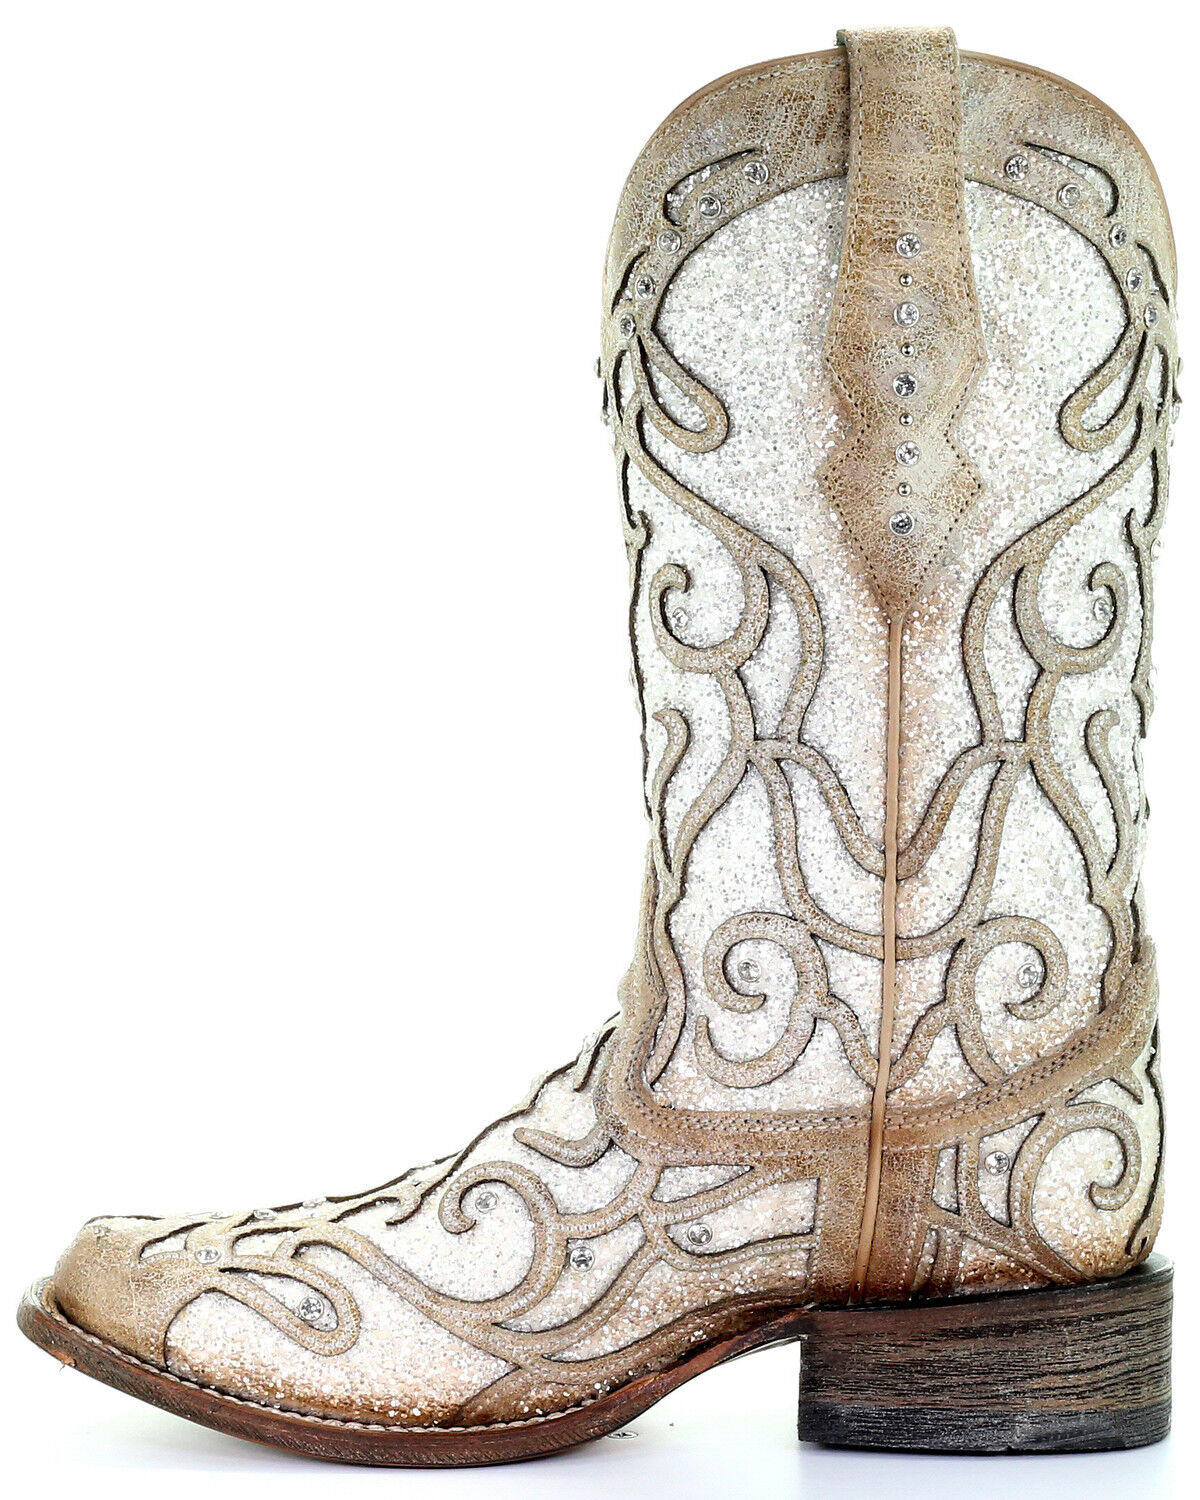 corral women's glitter inlay western boots